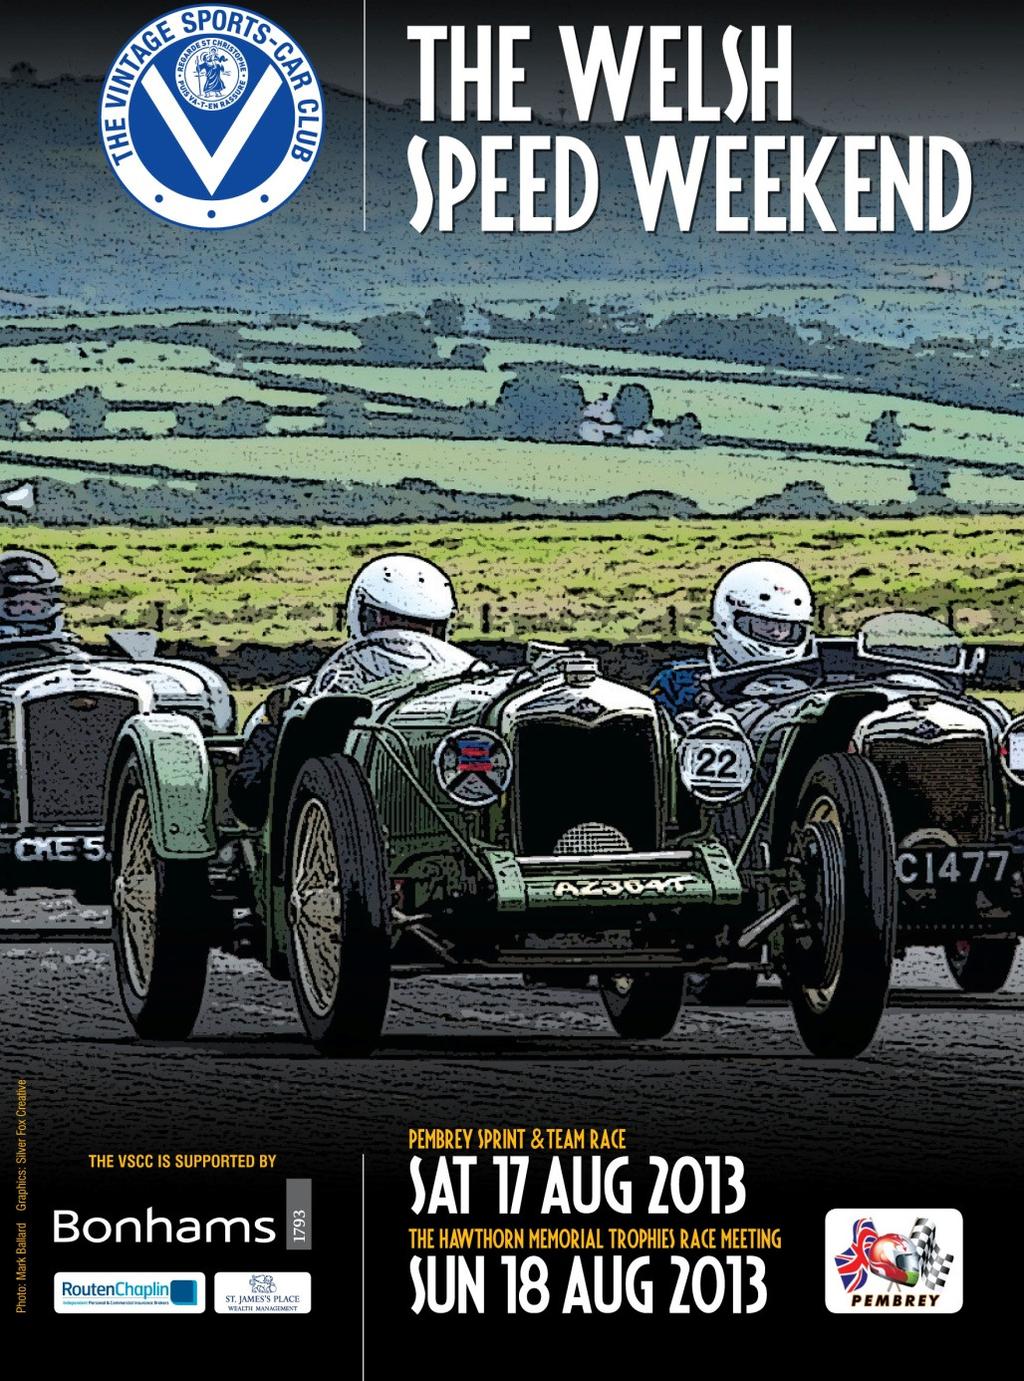 VSCC WELSH SPEED WEEKEND 2013 PEMBREY CIRCUIT 17/18 AUGUST EVENT TIMETABLE & ENTRY LISTS